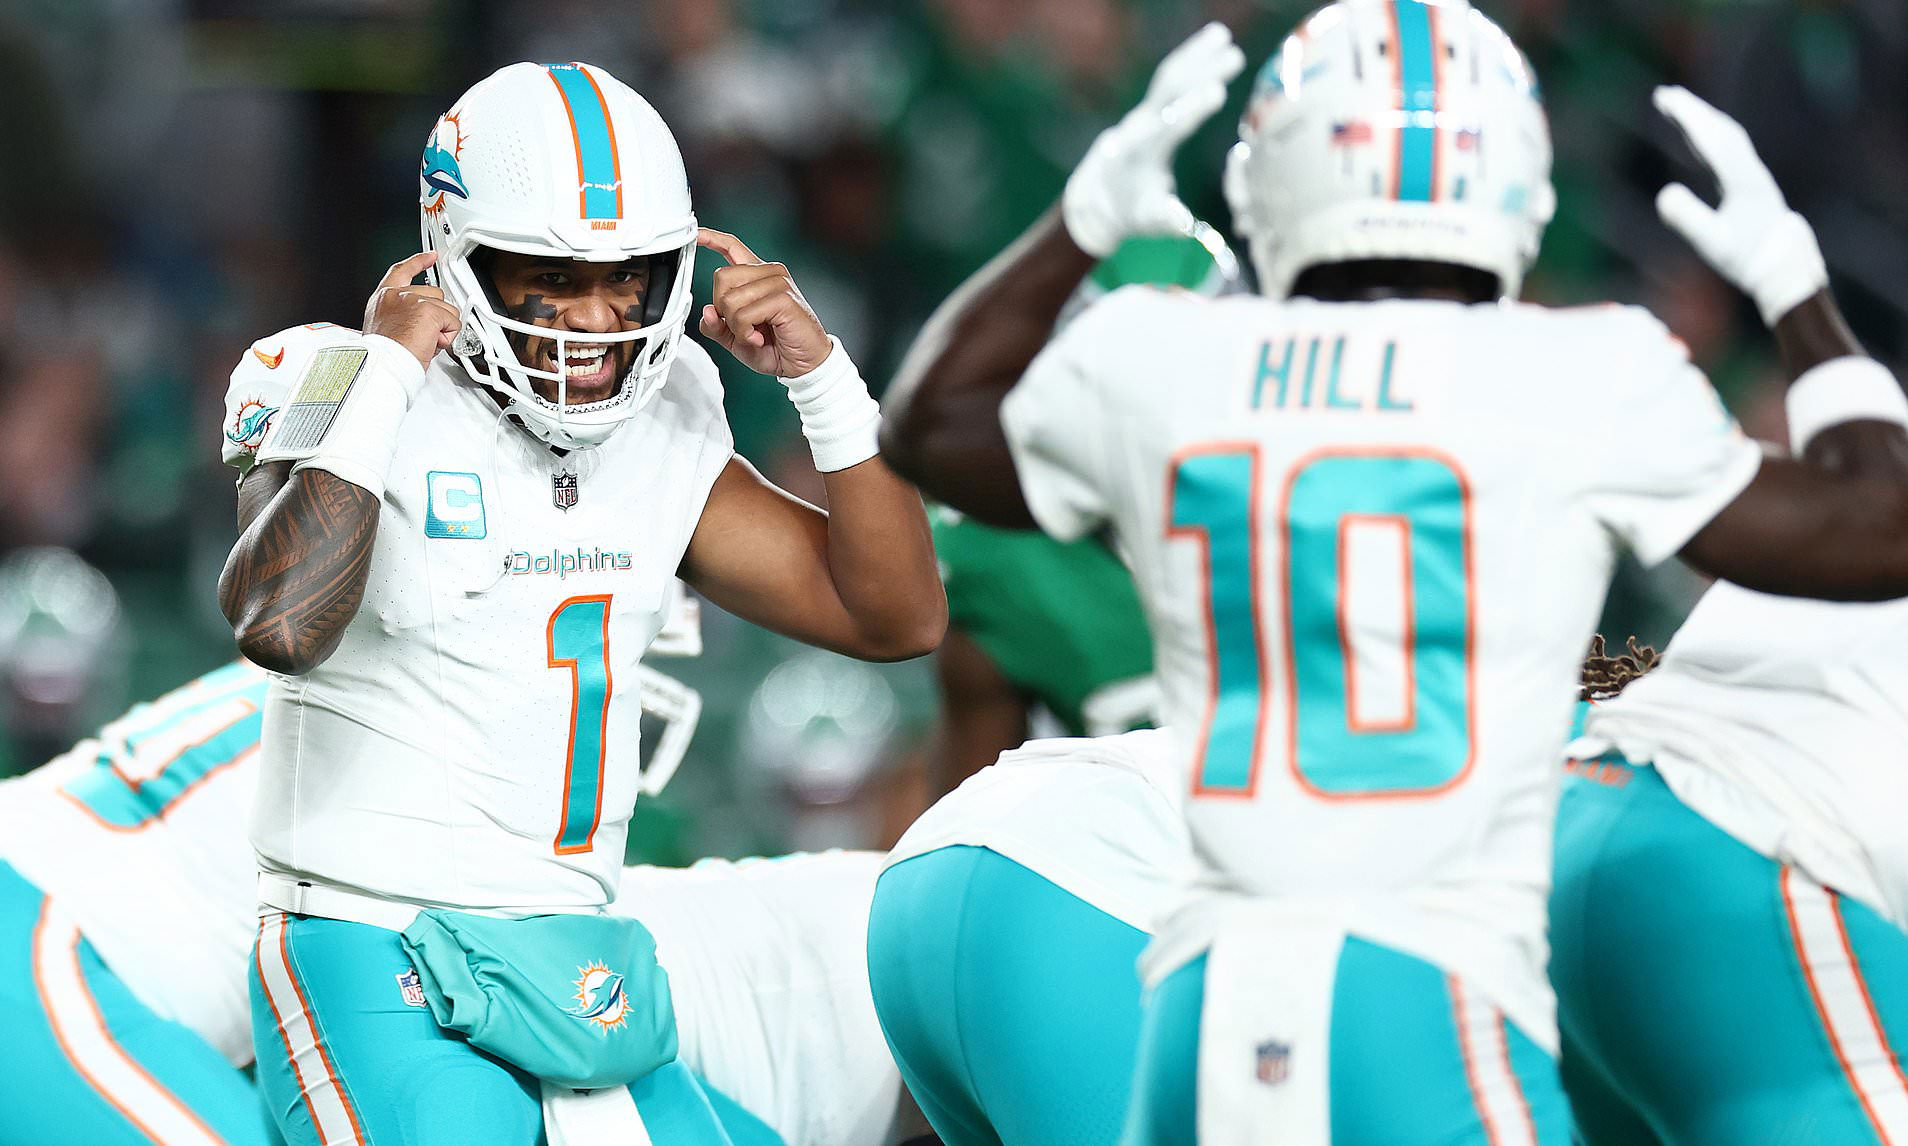 Miami Dolphins are chosen as the next team to feature on Hard Knocks